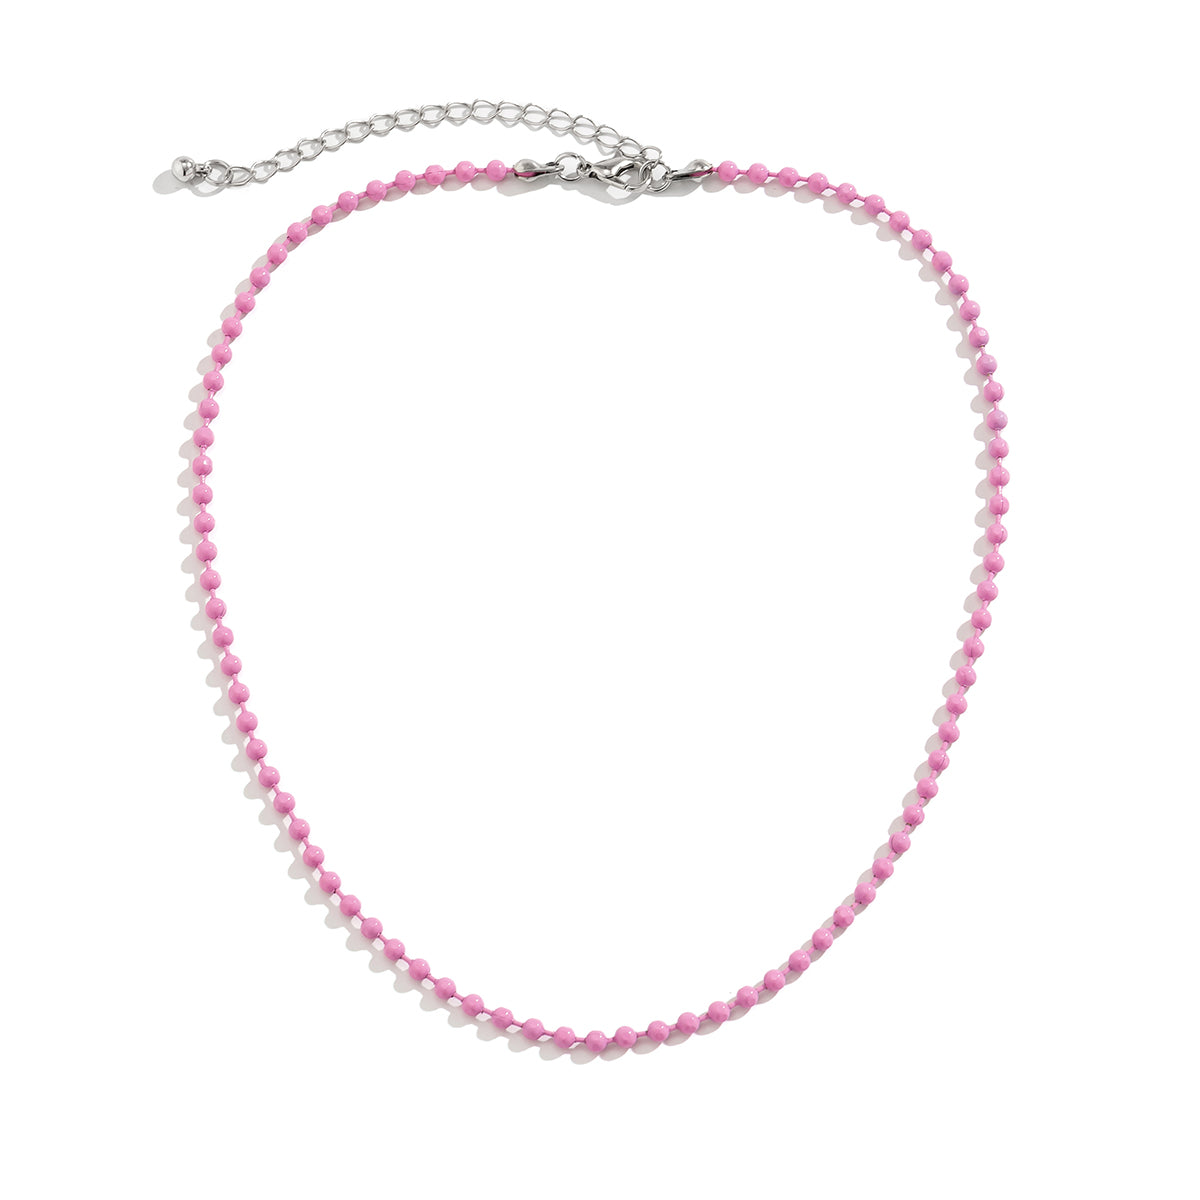 Pink Enamel & Silver-Plated Bead Chain Necklace